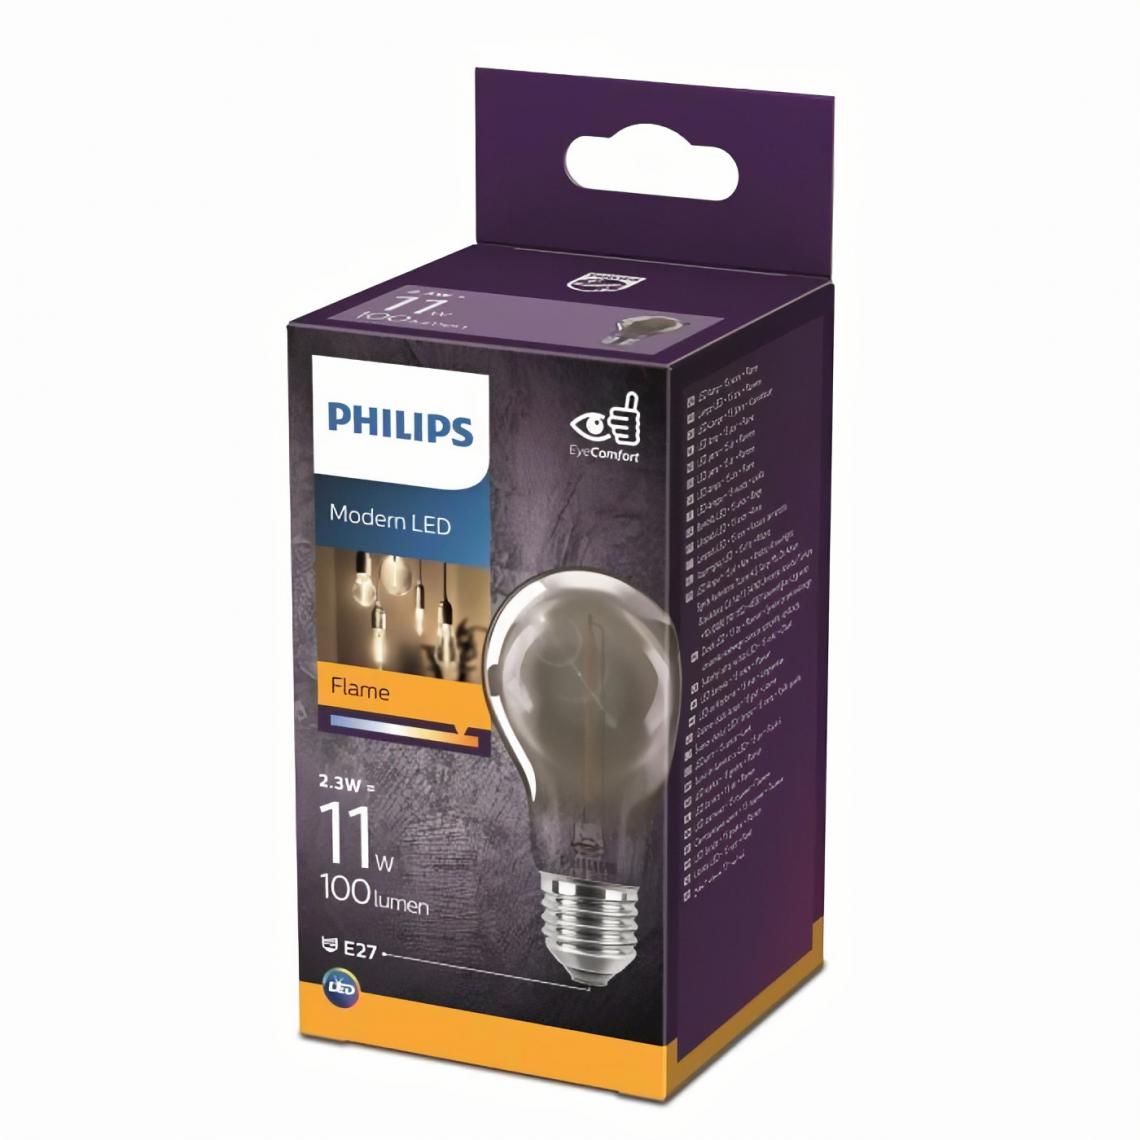 Philips - PHILIPS LED Classic 11W Standard Modern Filament Mini Smoky E27 Blanc Chaud Non Dimmable - Ampoules LED